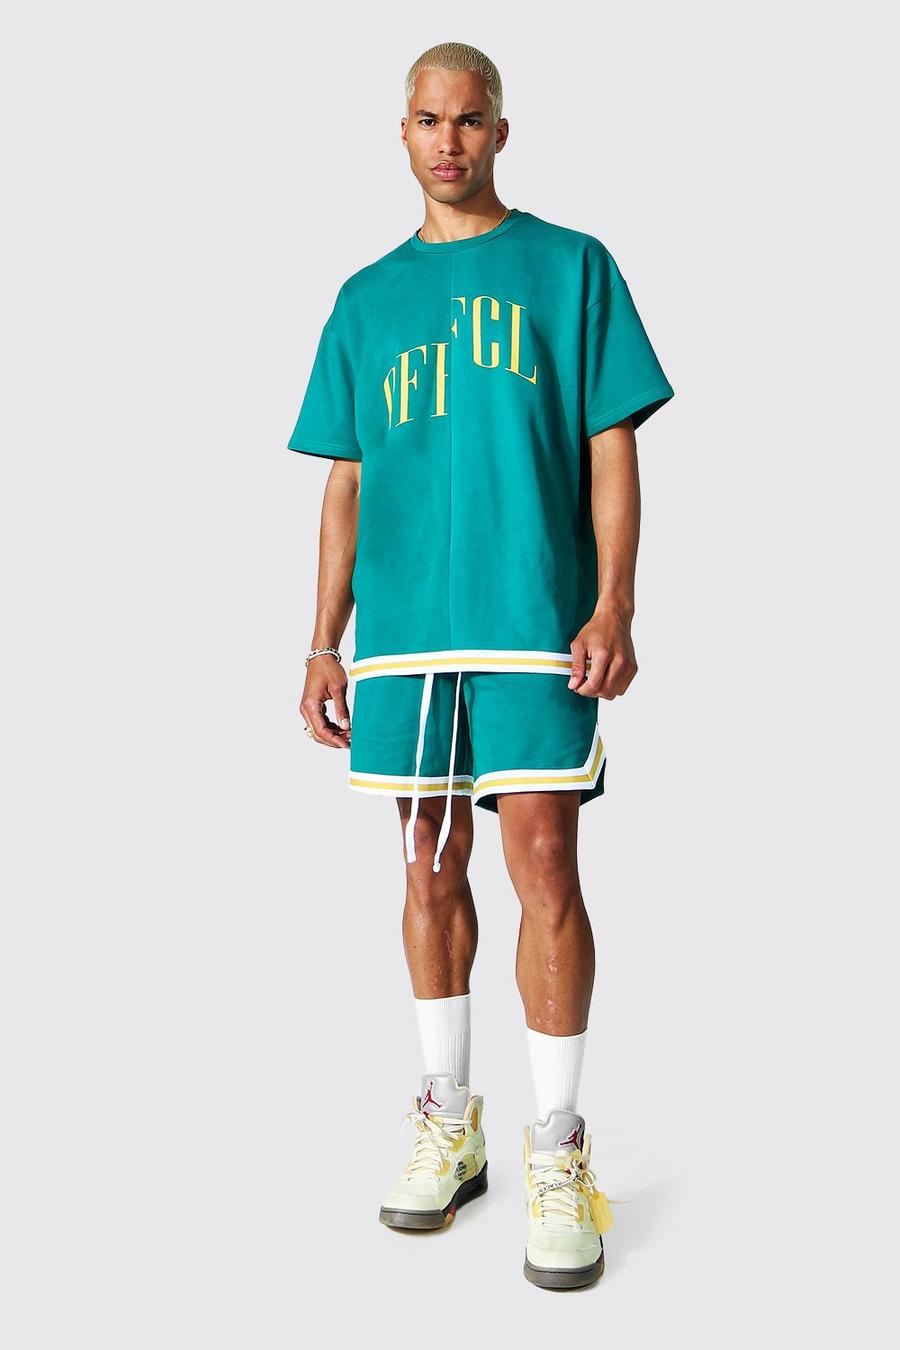 Teal Oversized Offcl Tape T-Shirt and Basketball image number 1